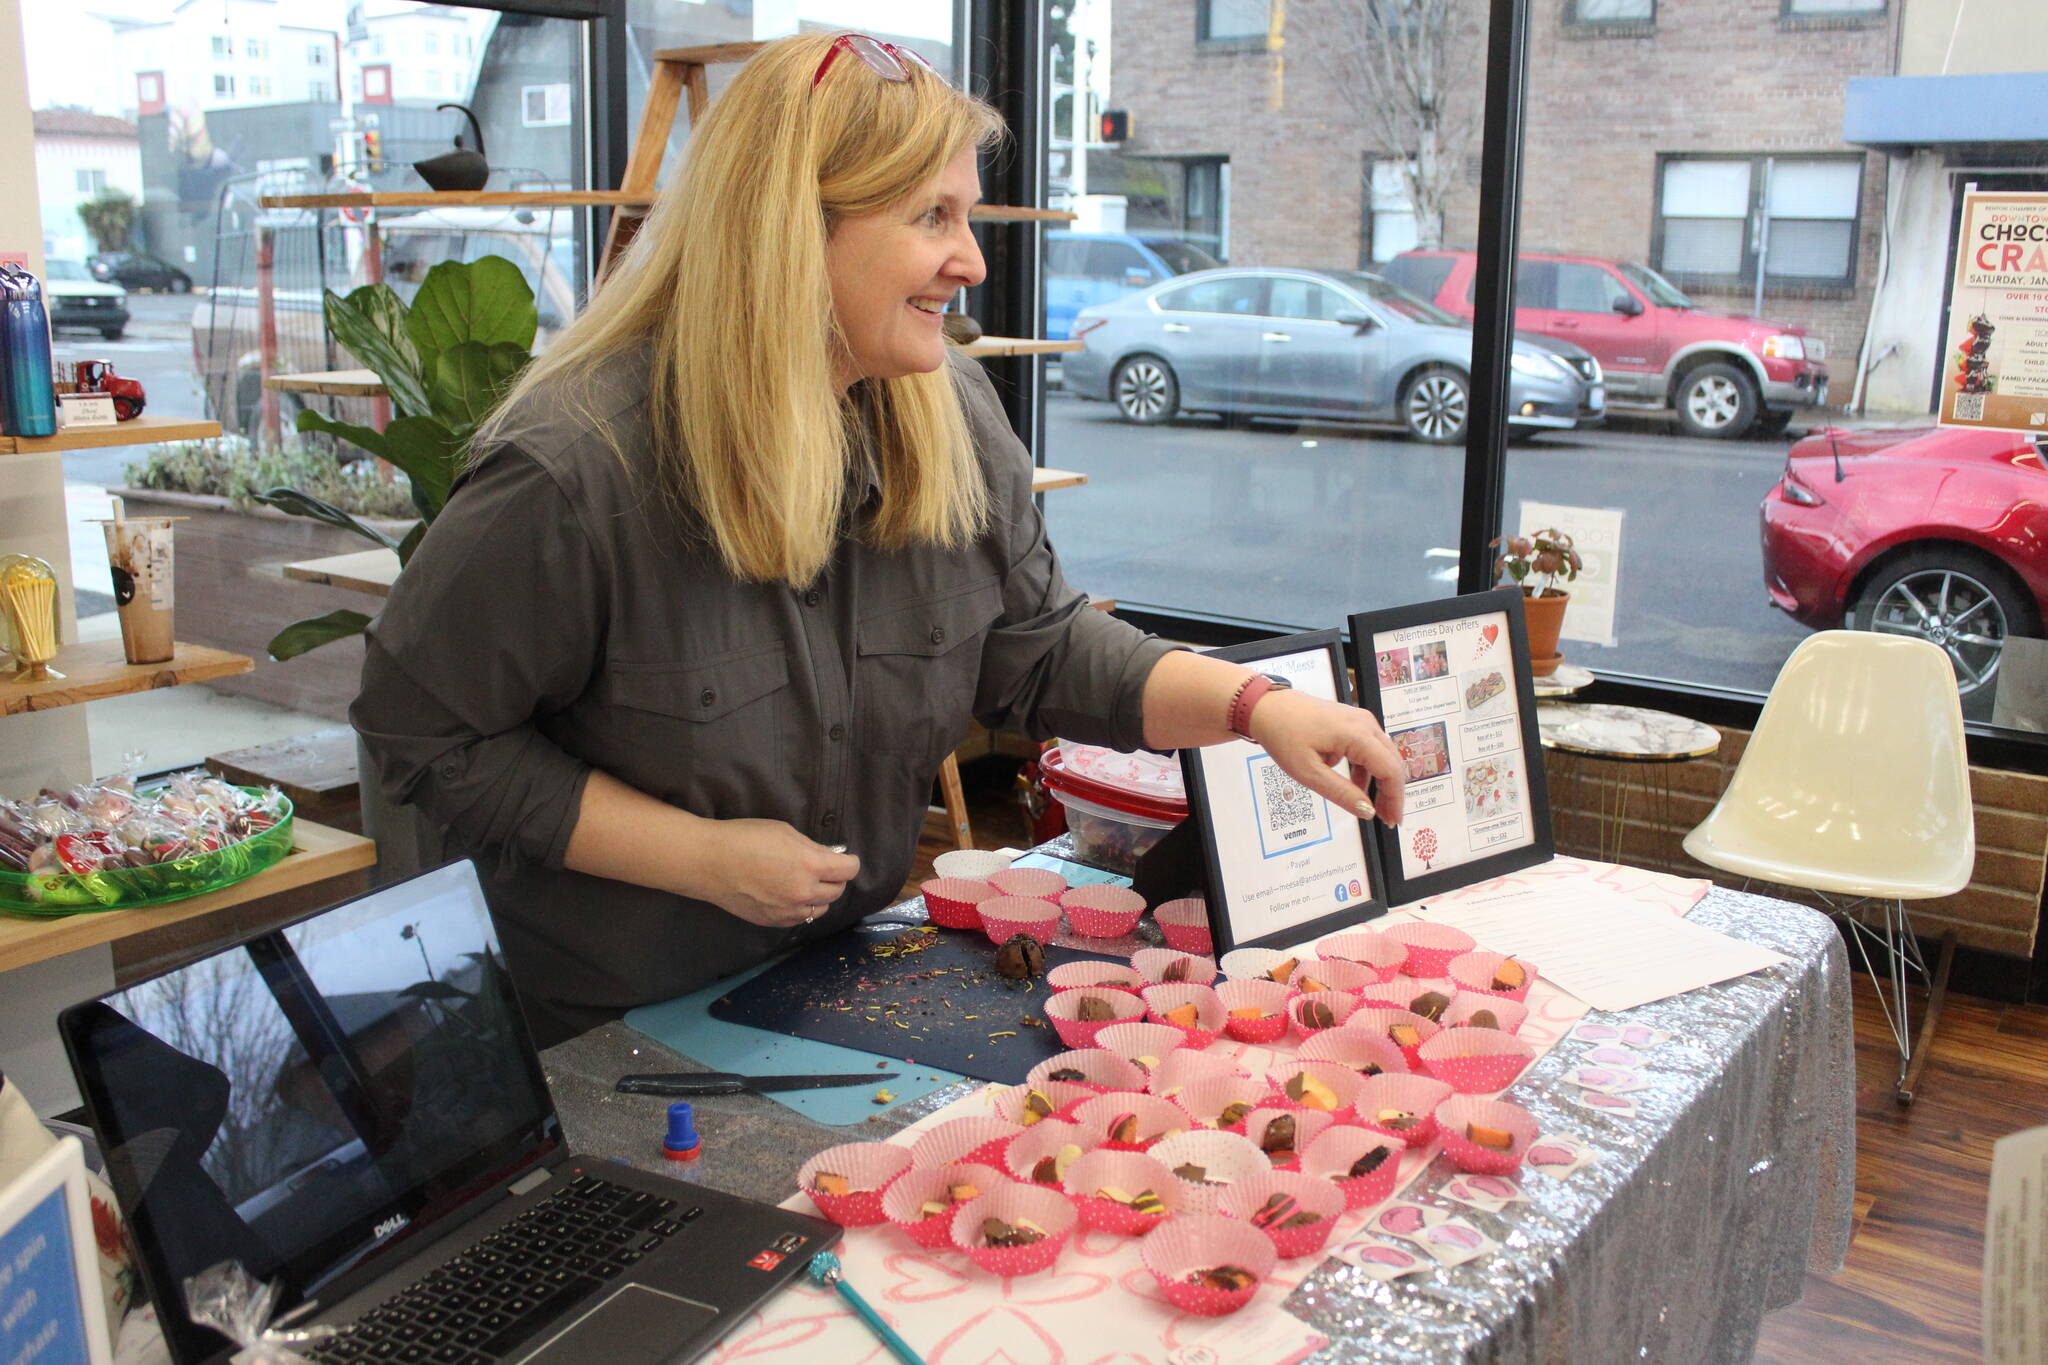 Cookies by Meesa was stop #3 of the Chocolate Crawl at Boga. Photo by Bailey Jo Josie/Sound Publishing.